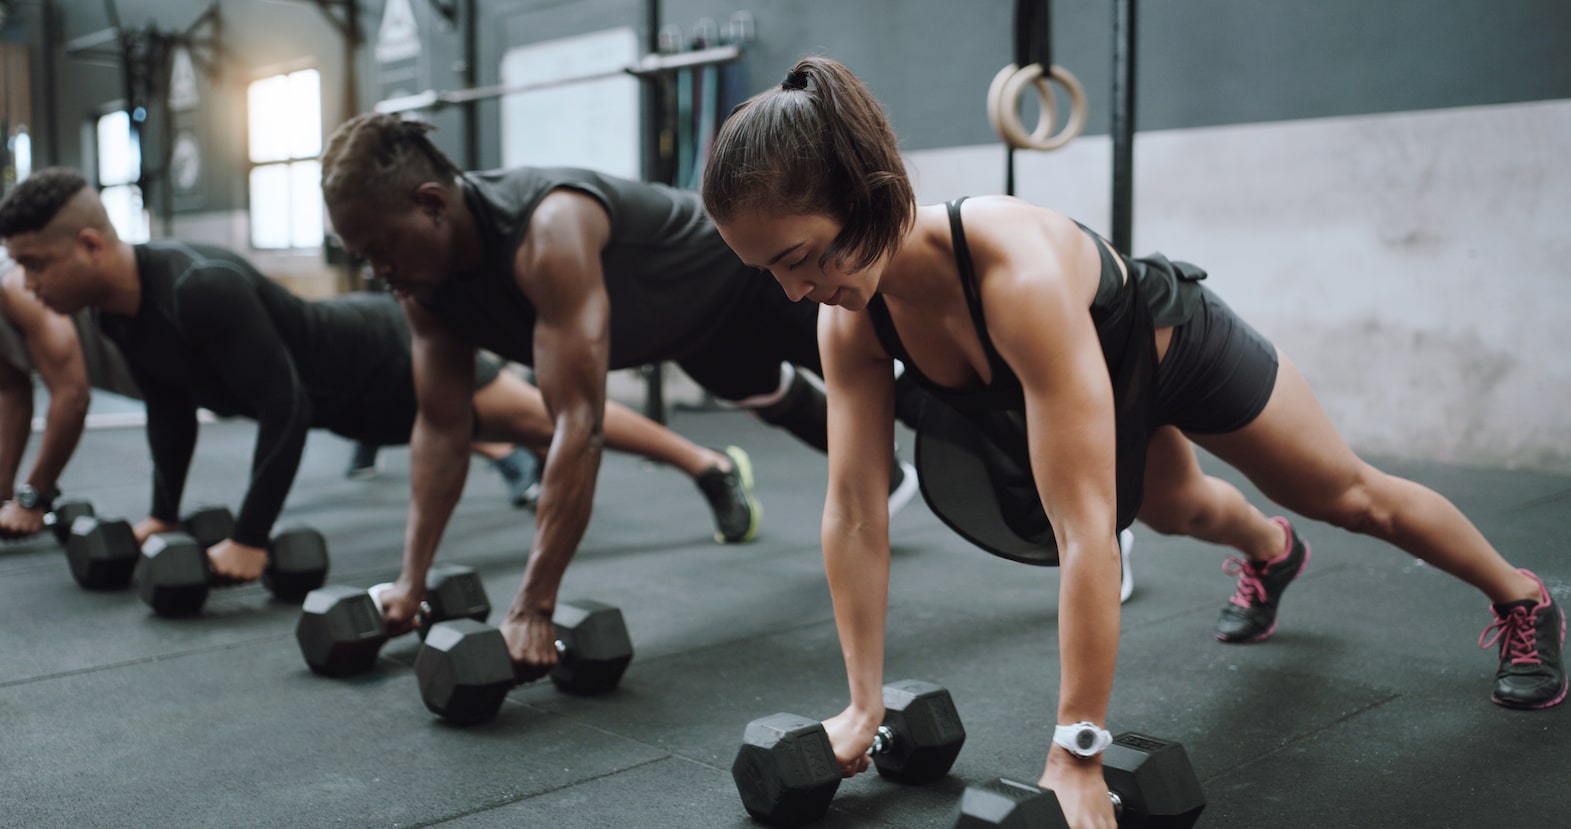 Why Normal Weight People With Type 2 Diabetes Should Emphasize Strength Training